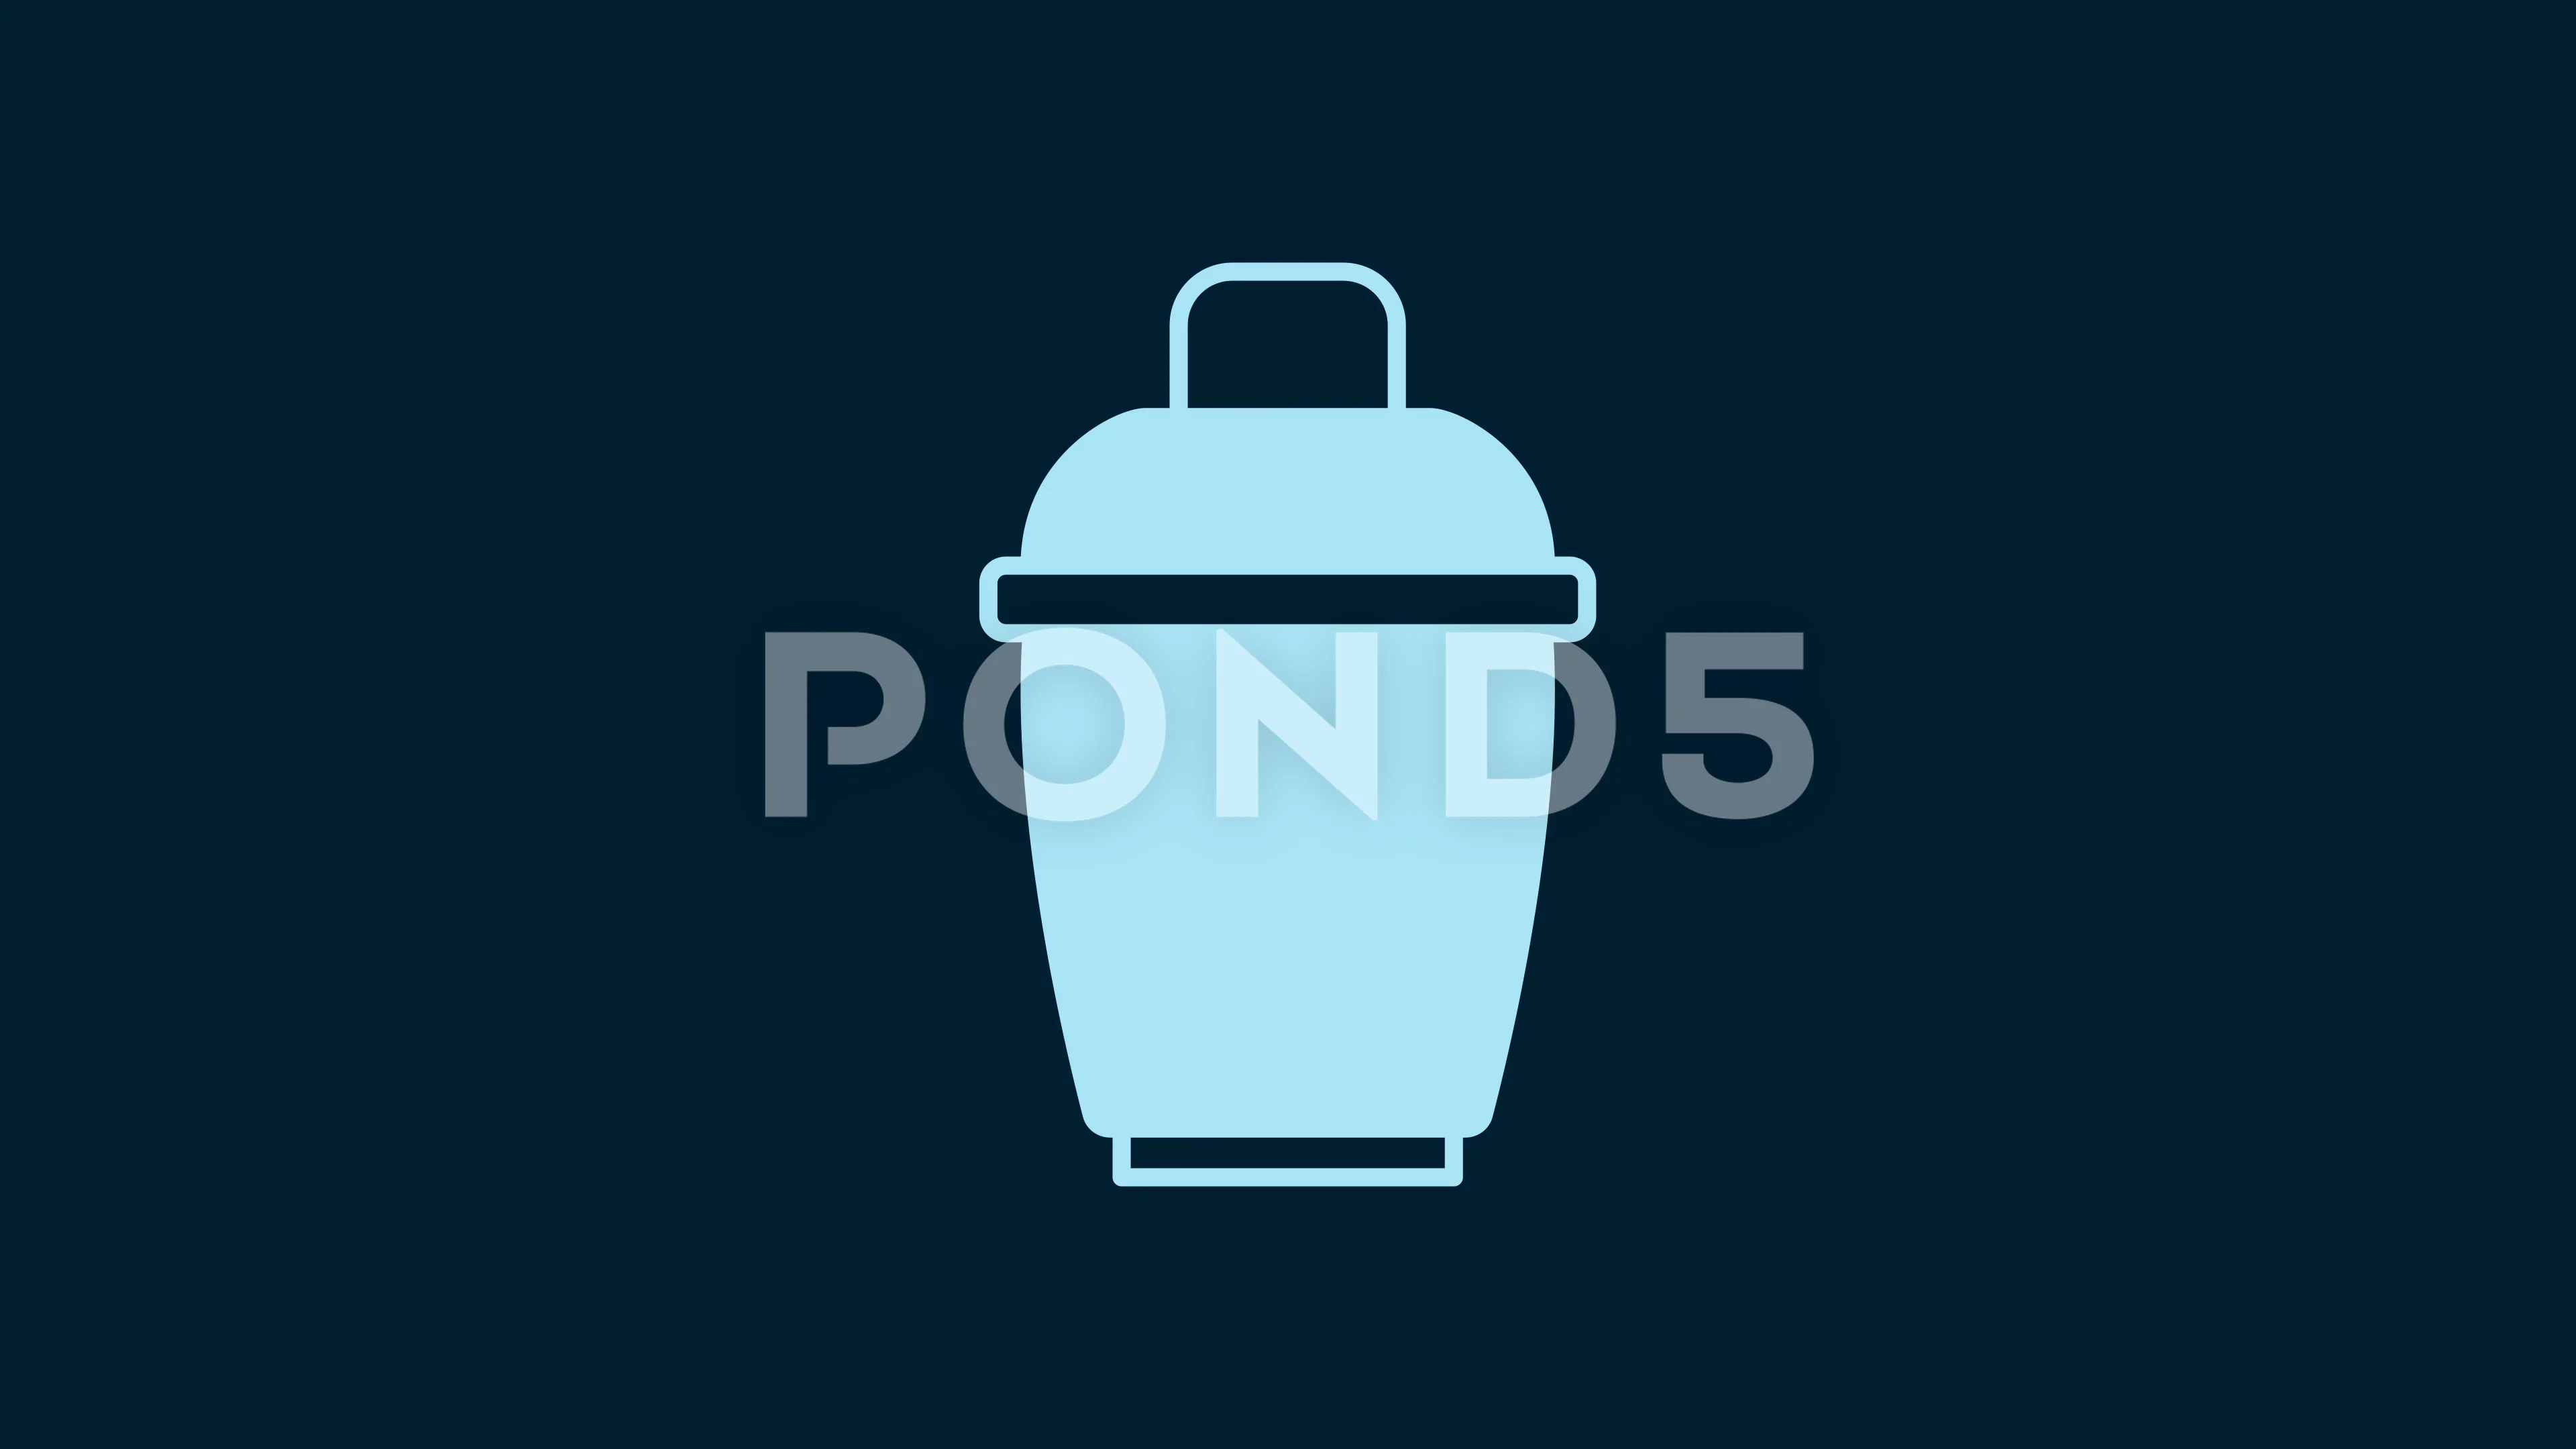 https://images.pond5.com/white-cocktail-shaker-icon-isolated-footage-229558789_prevstill.jpeg